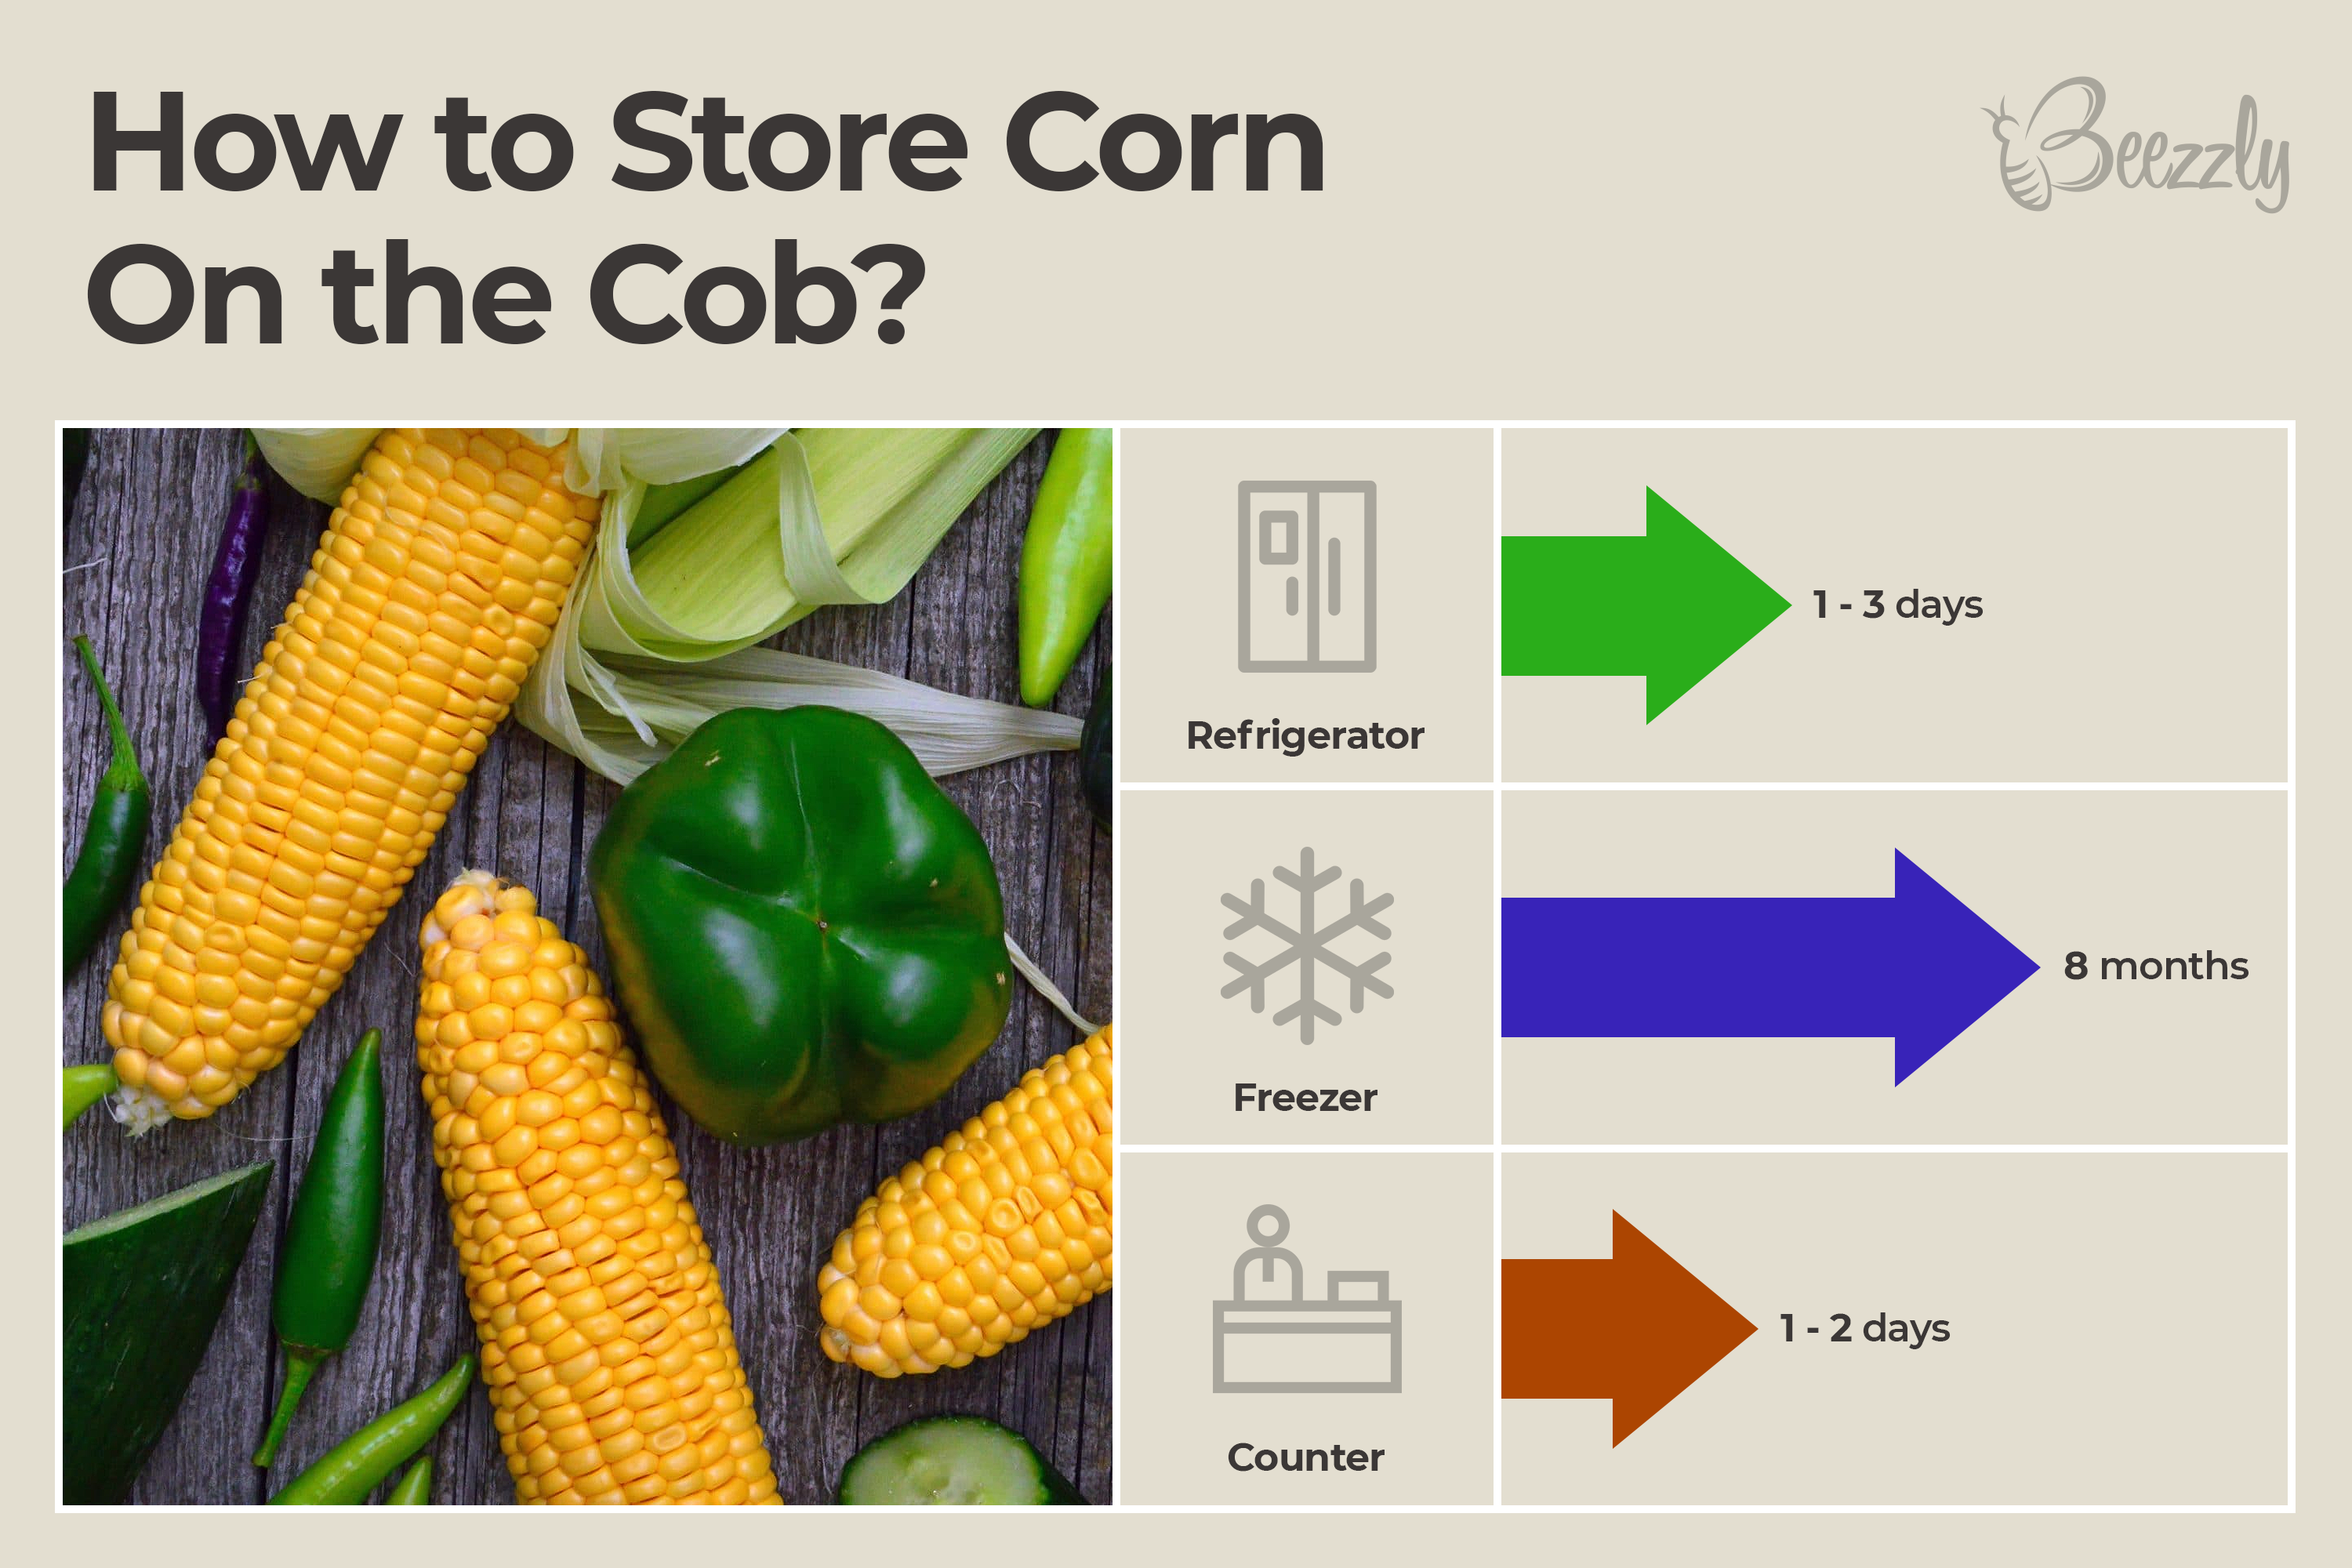 How to store corn on the cob